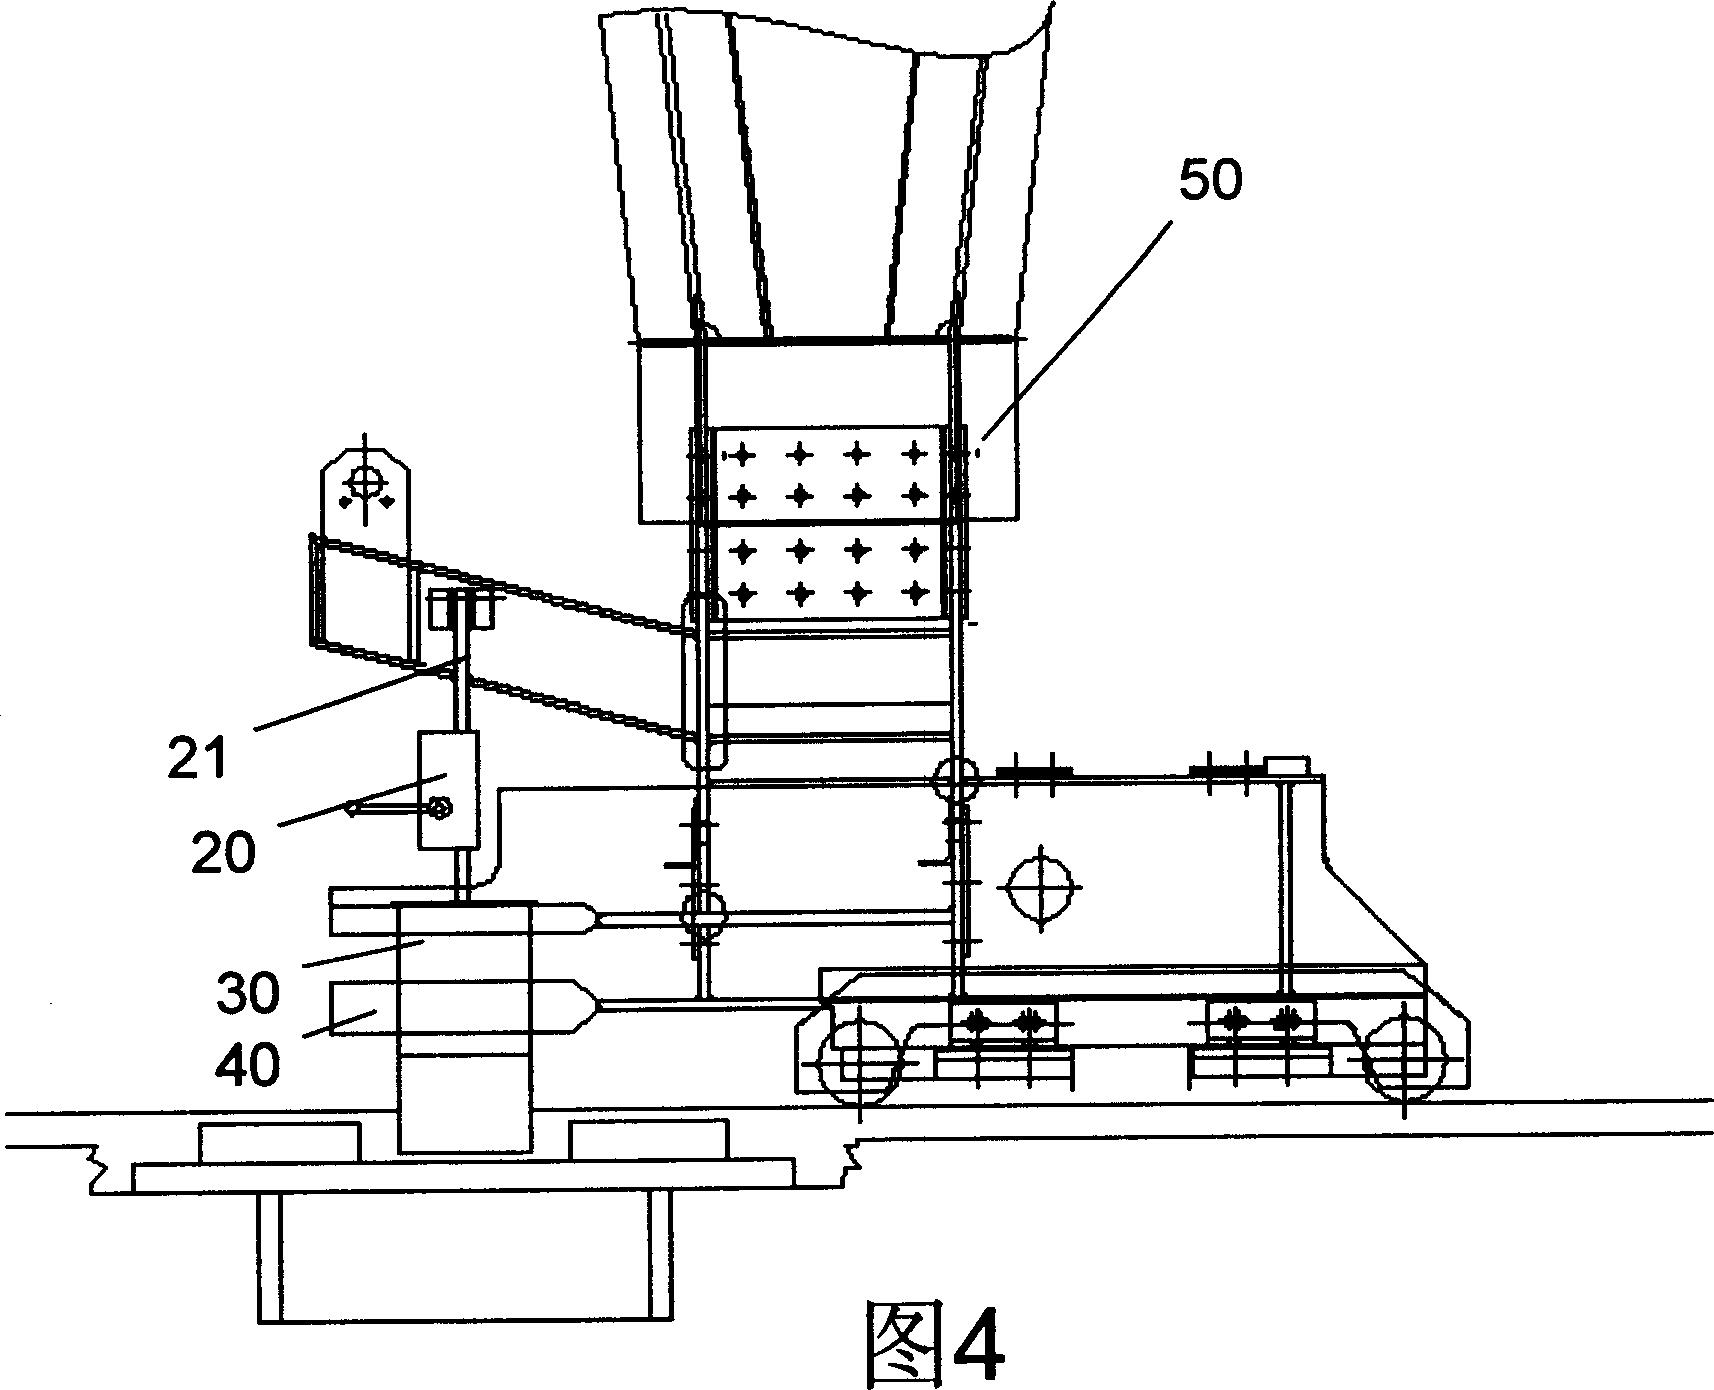 Transmission type anchoring device